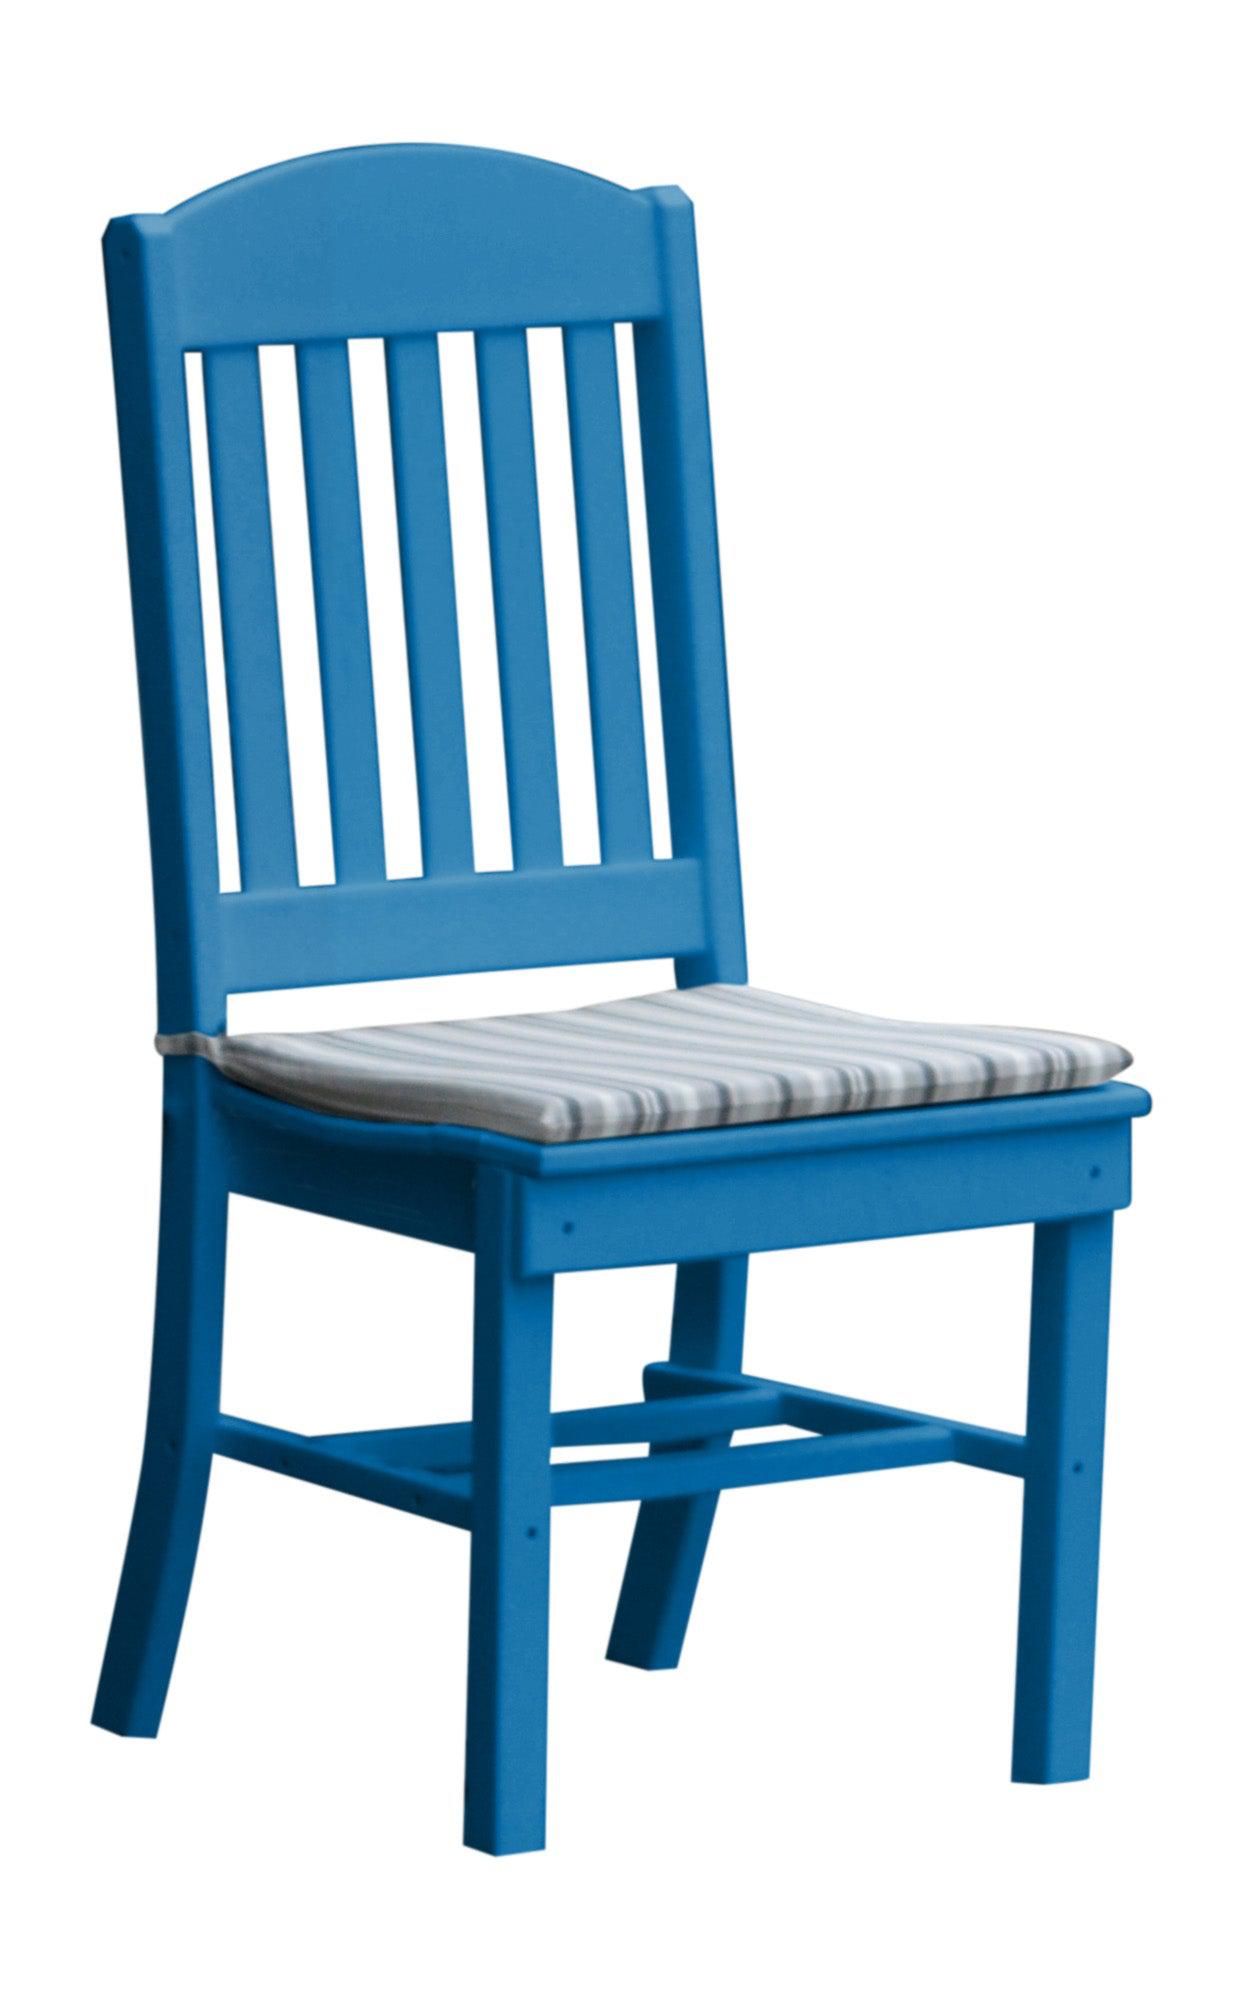 A&L Furniture Company Recycled Plastic Classic Dining Chair - Blue